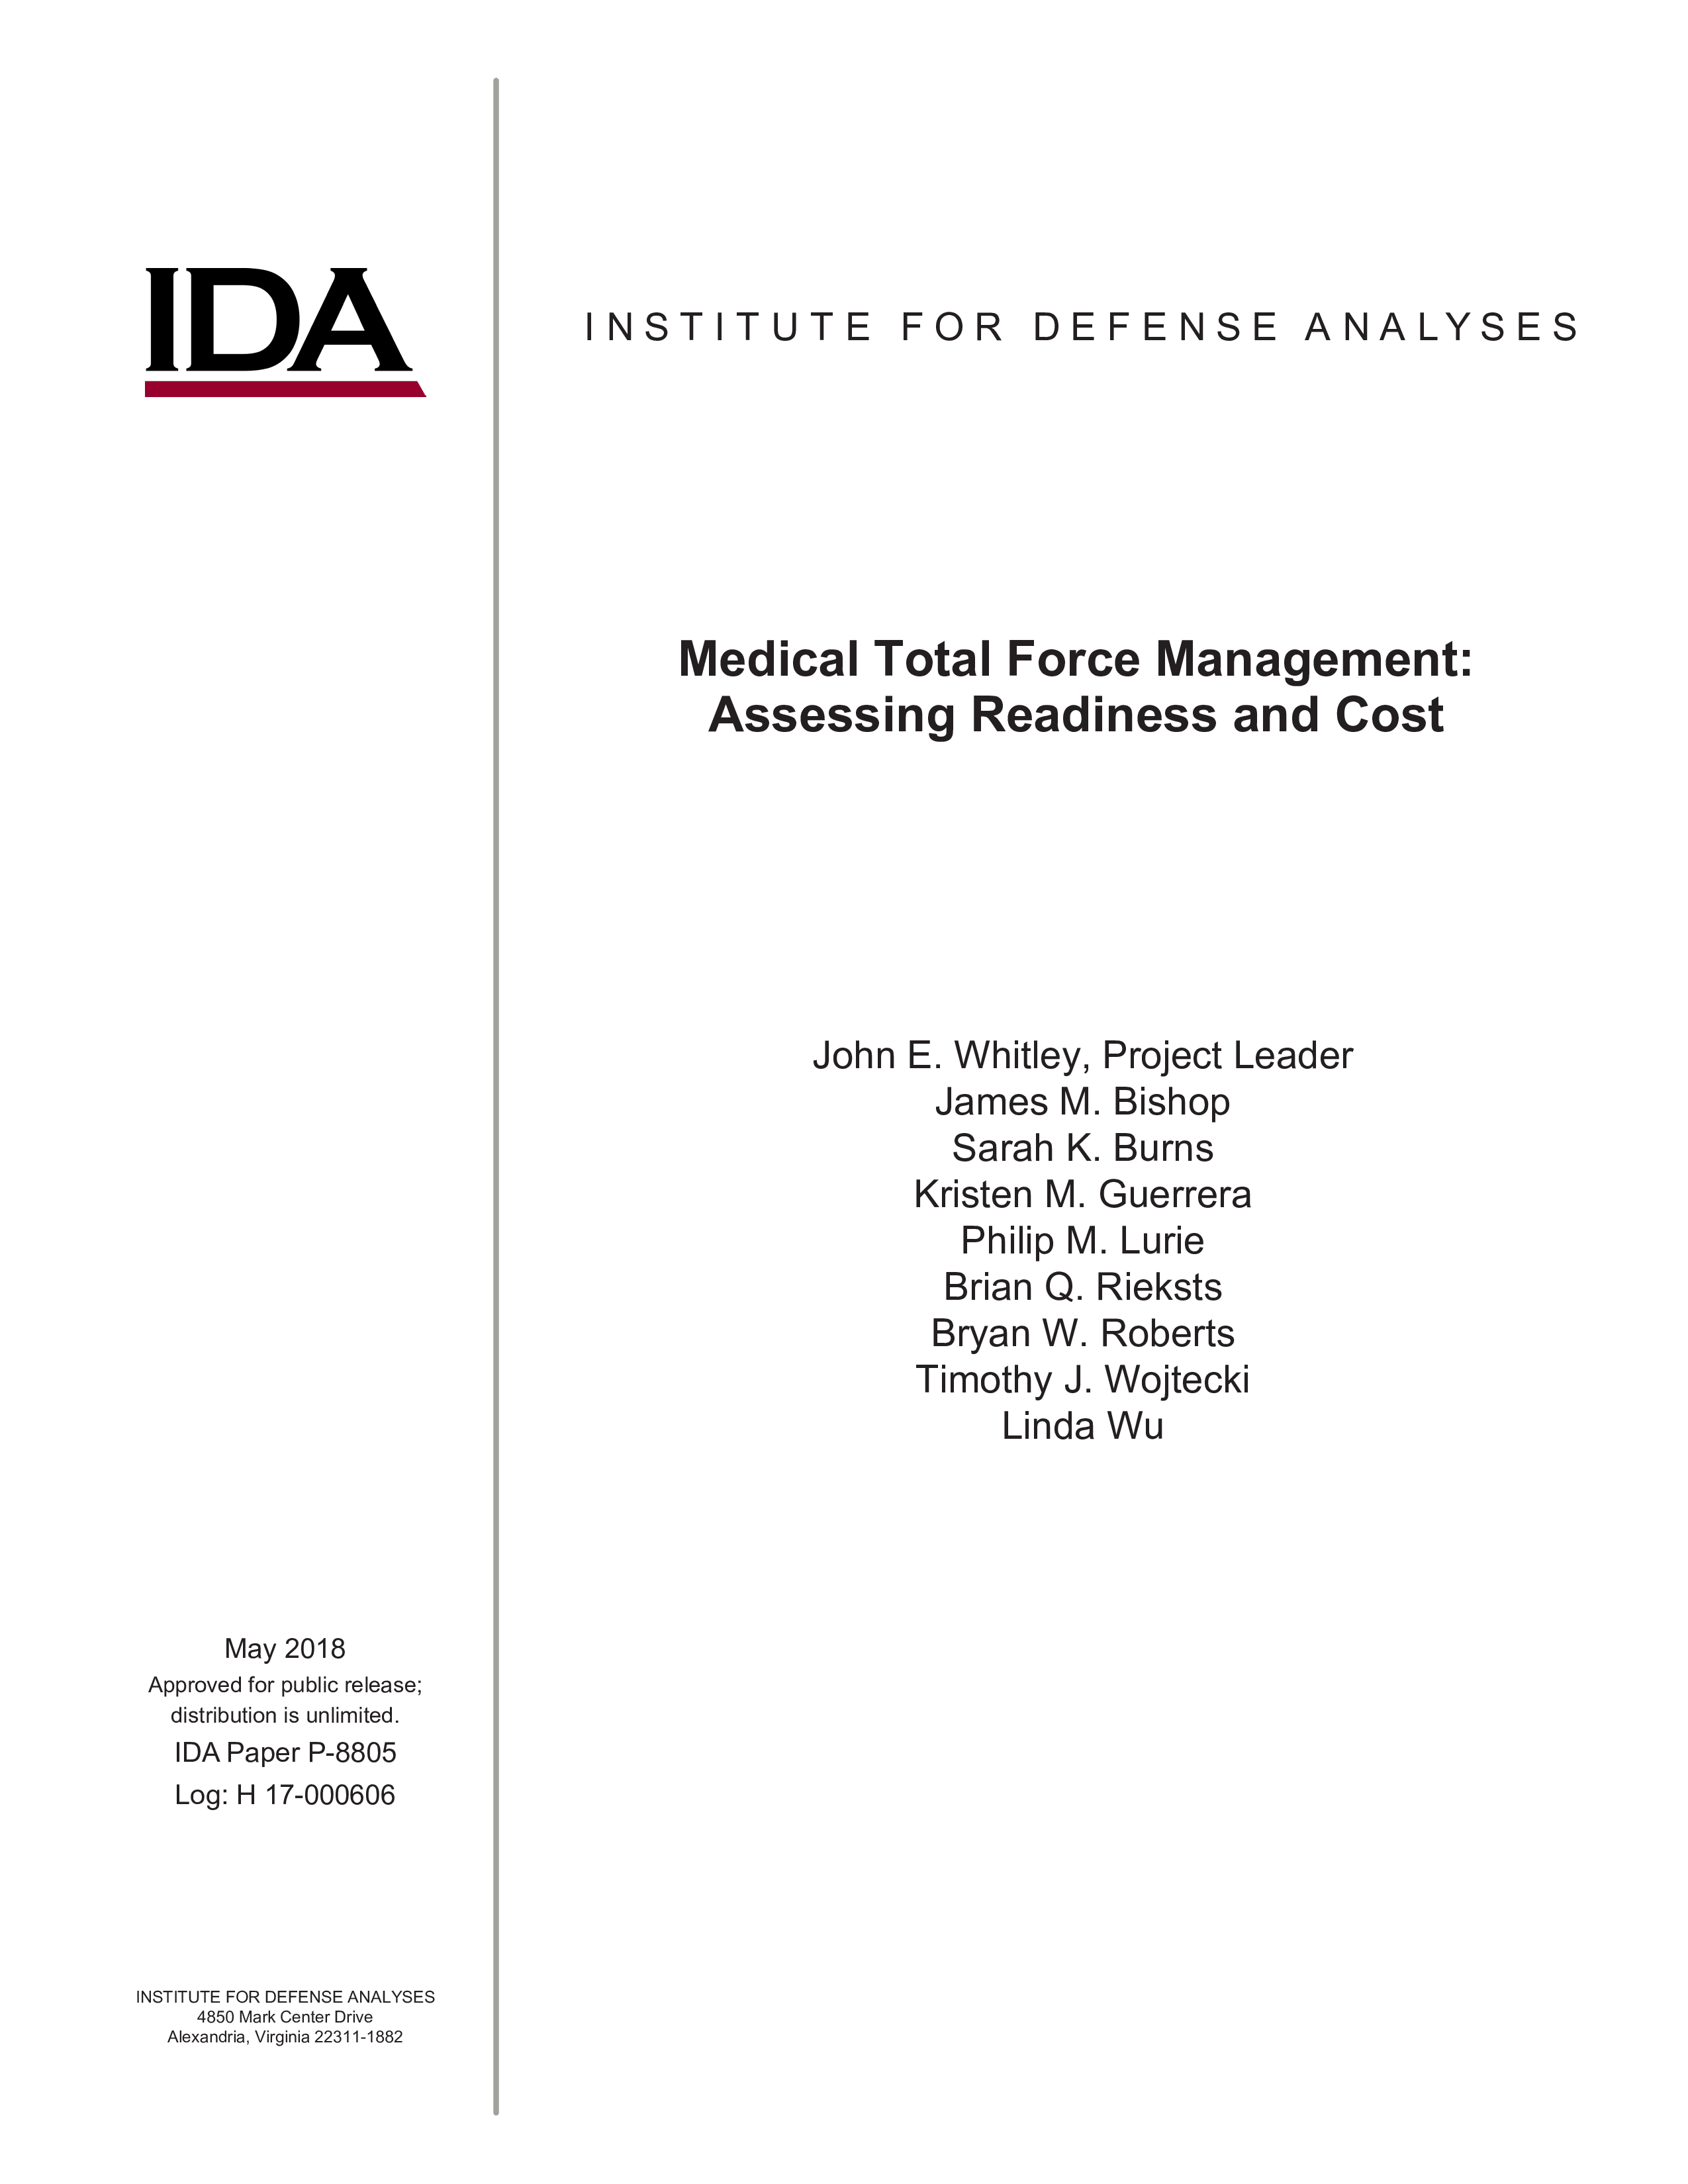 Medical Total Force Management: Assessing Readiness and Cost